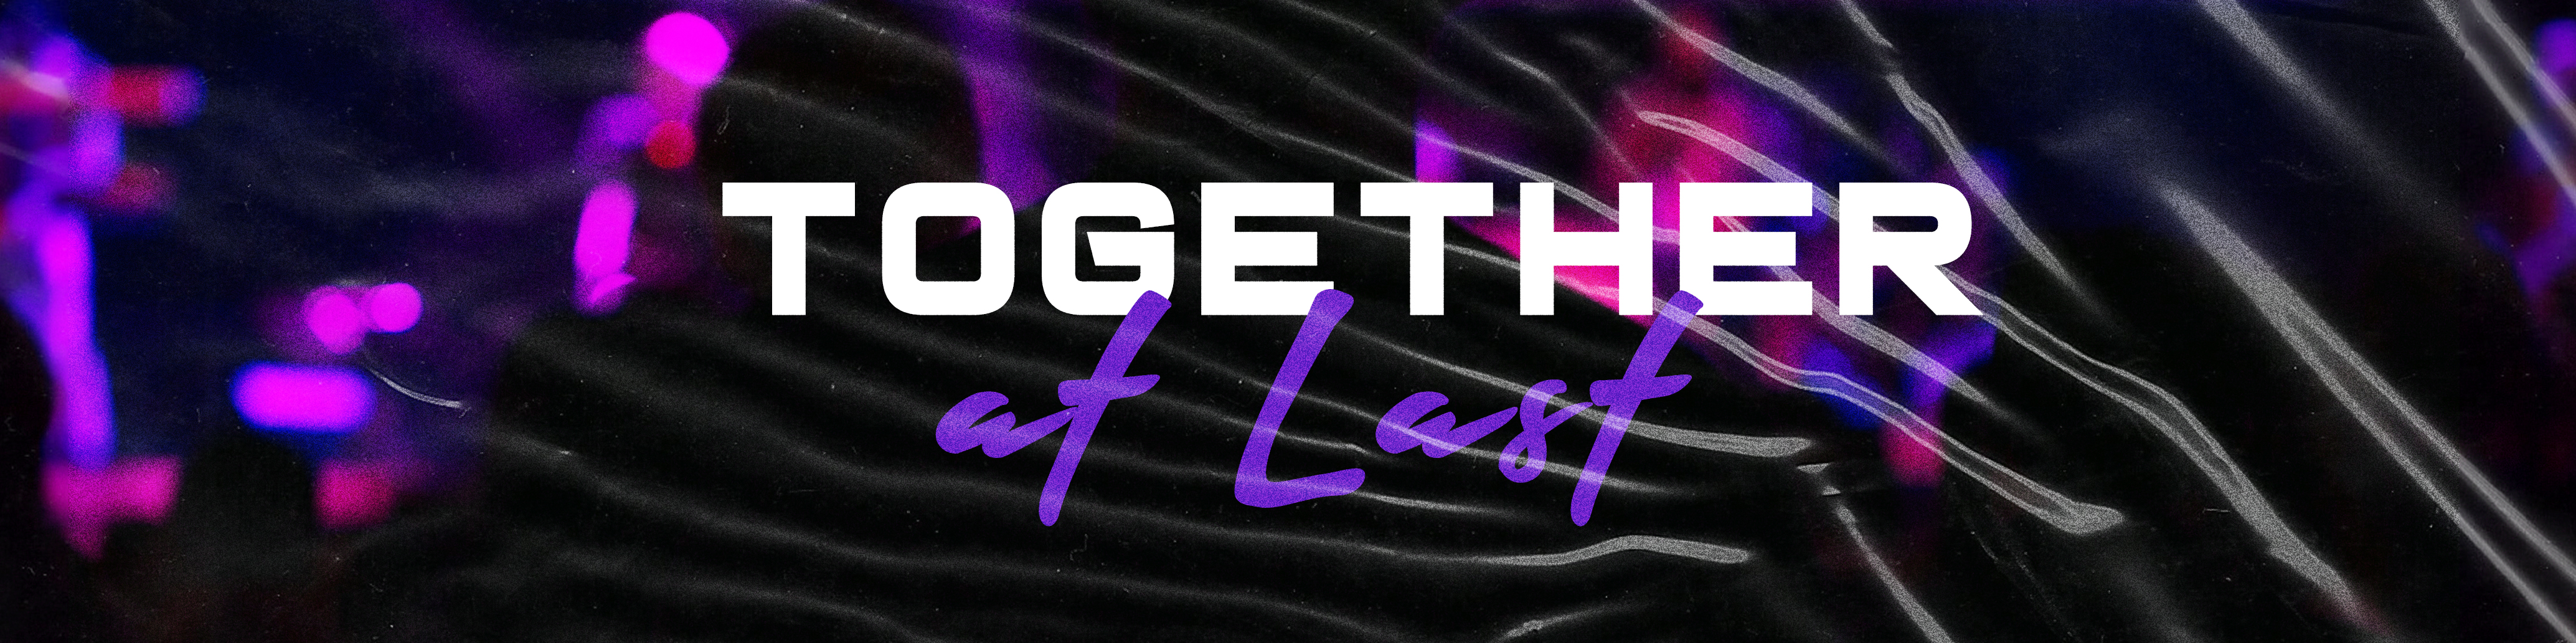 TOGETHER AT LAST web page